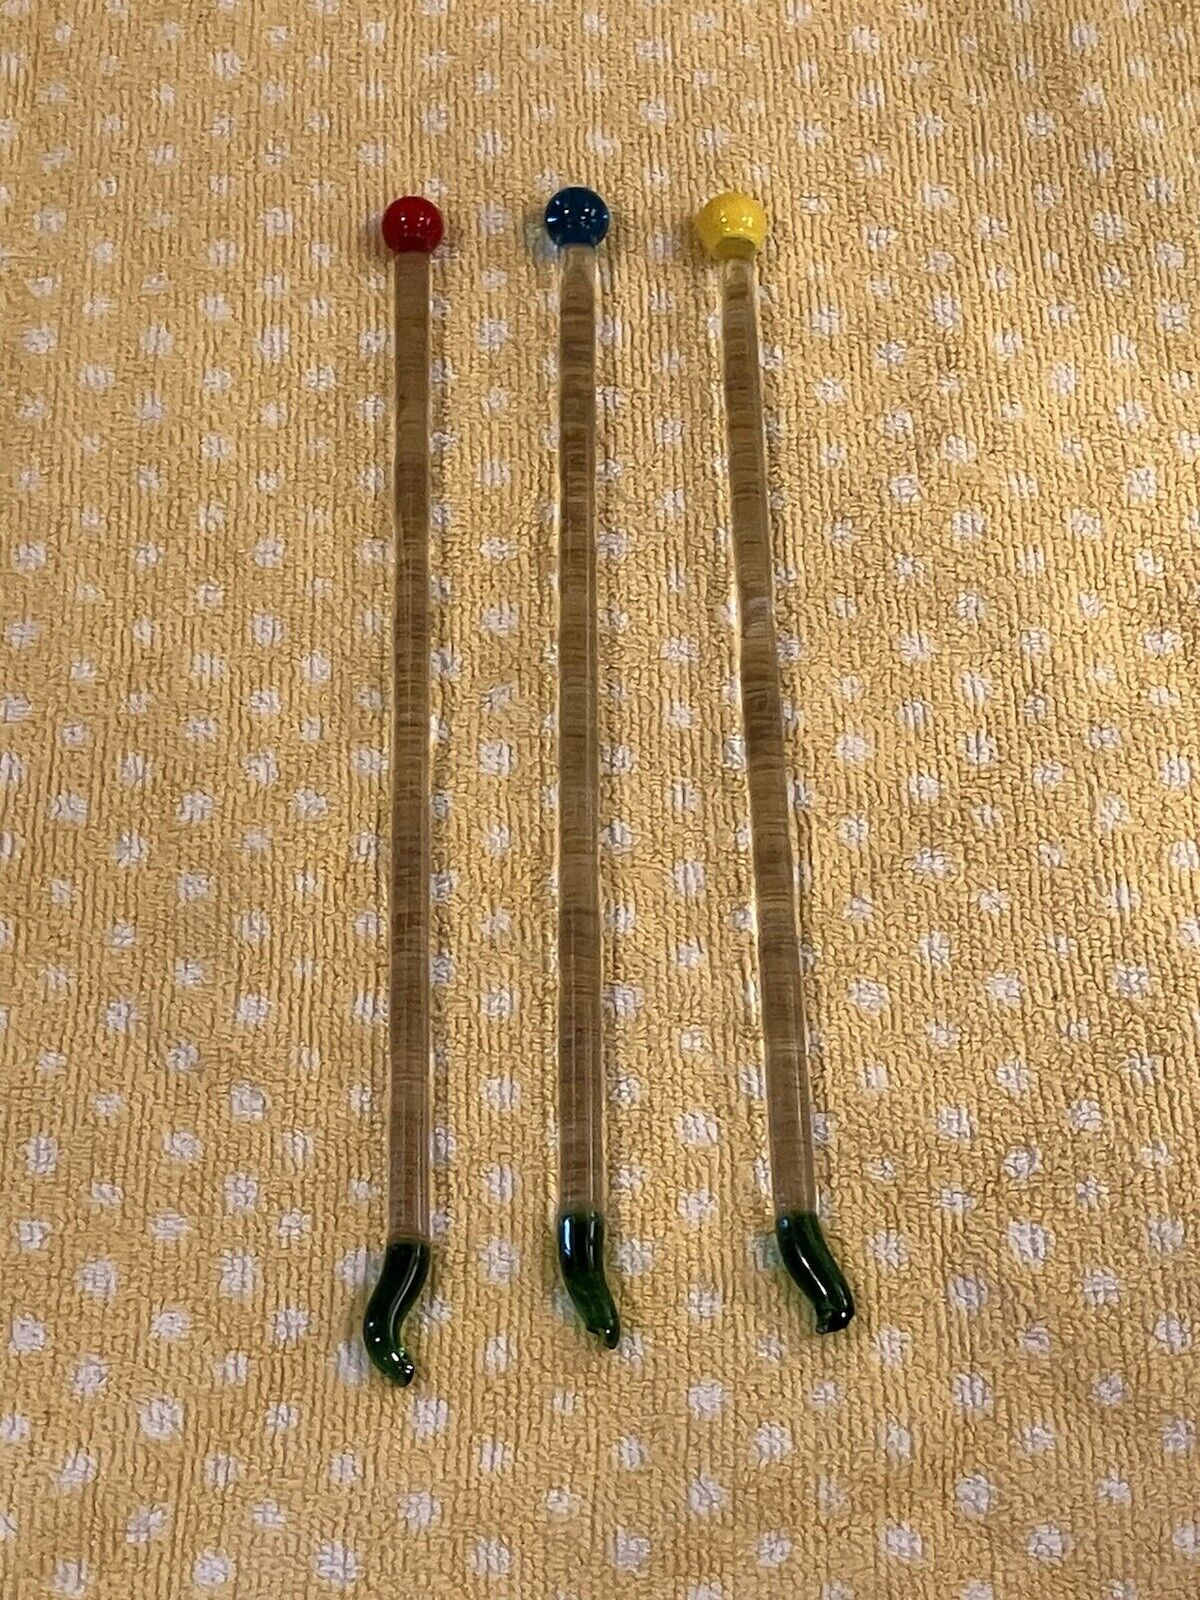 Vintage Green , Blue And Red Glass Stirrers 